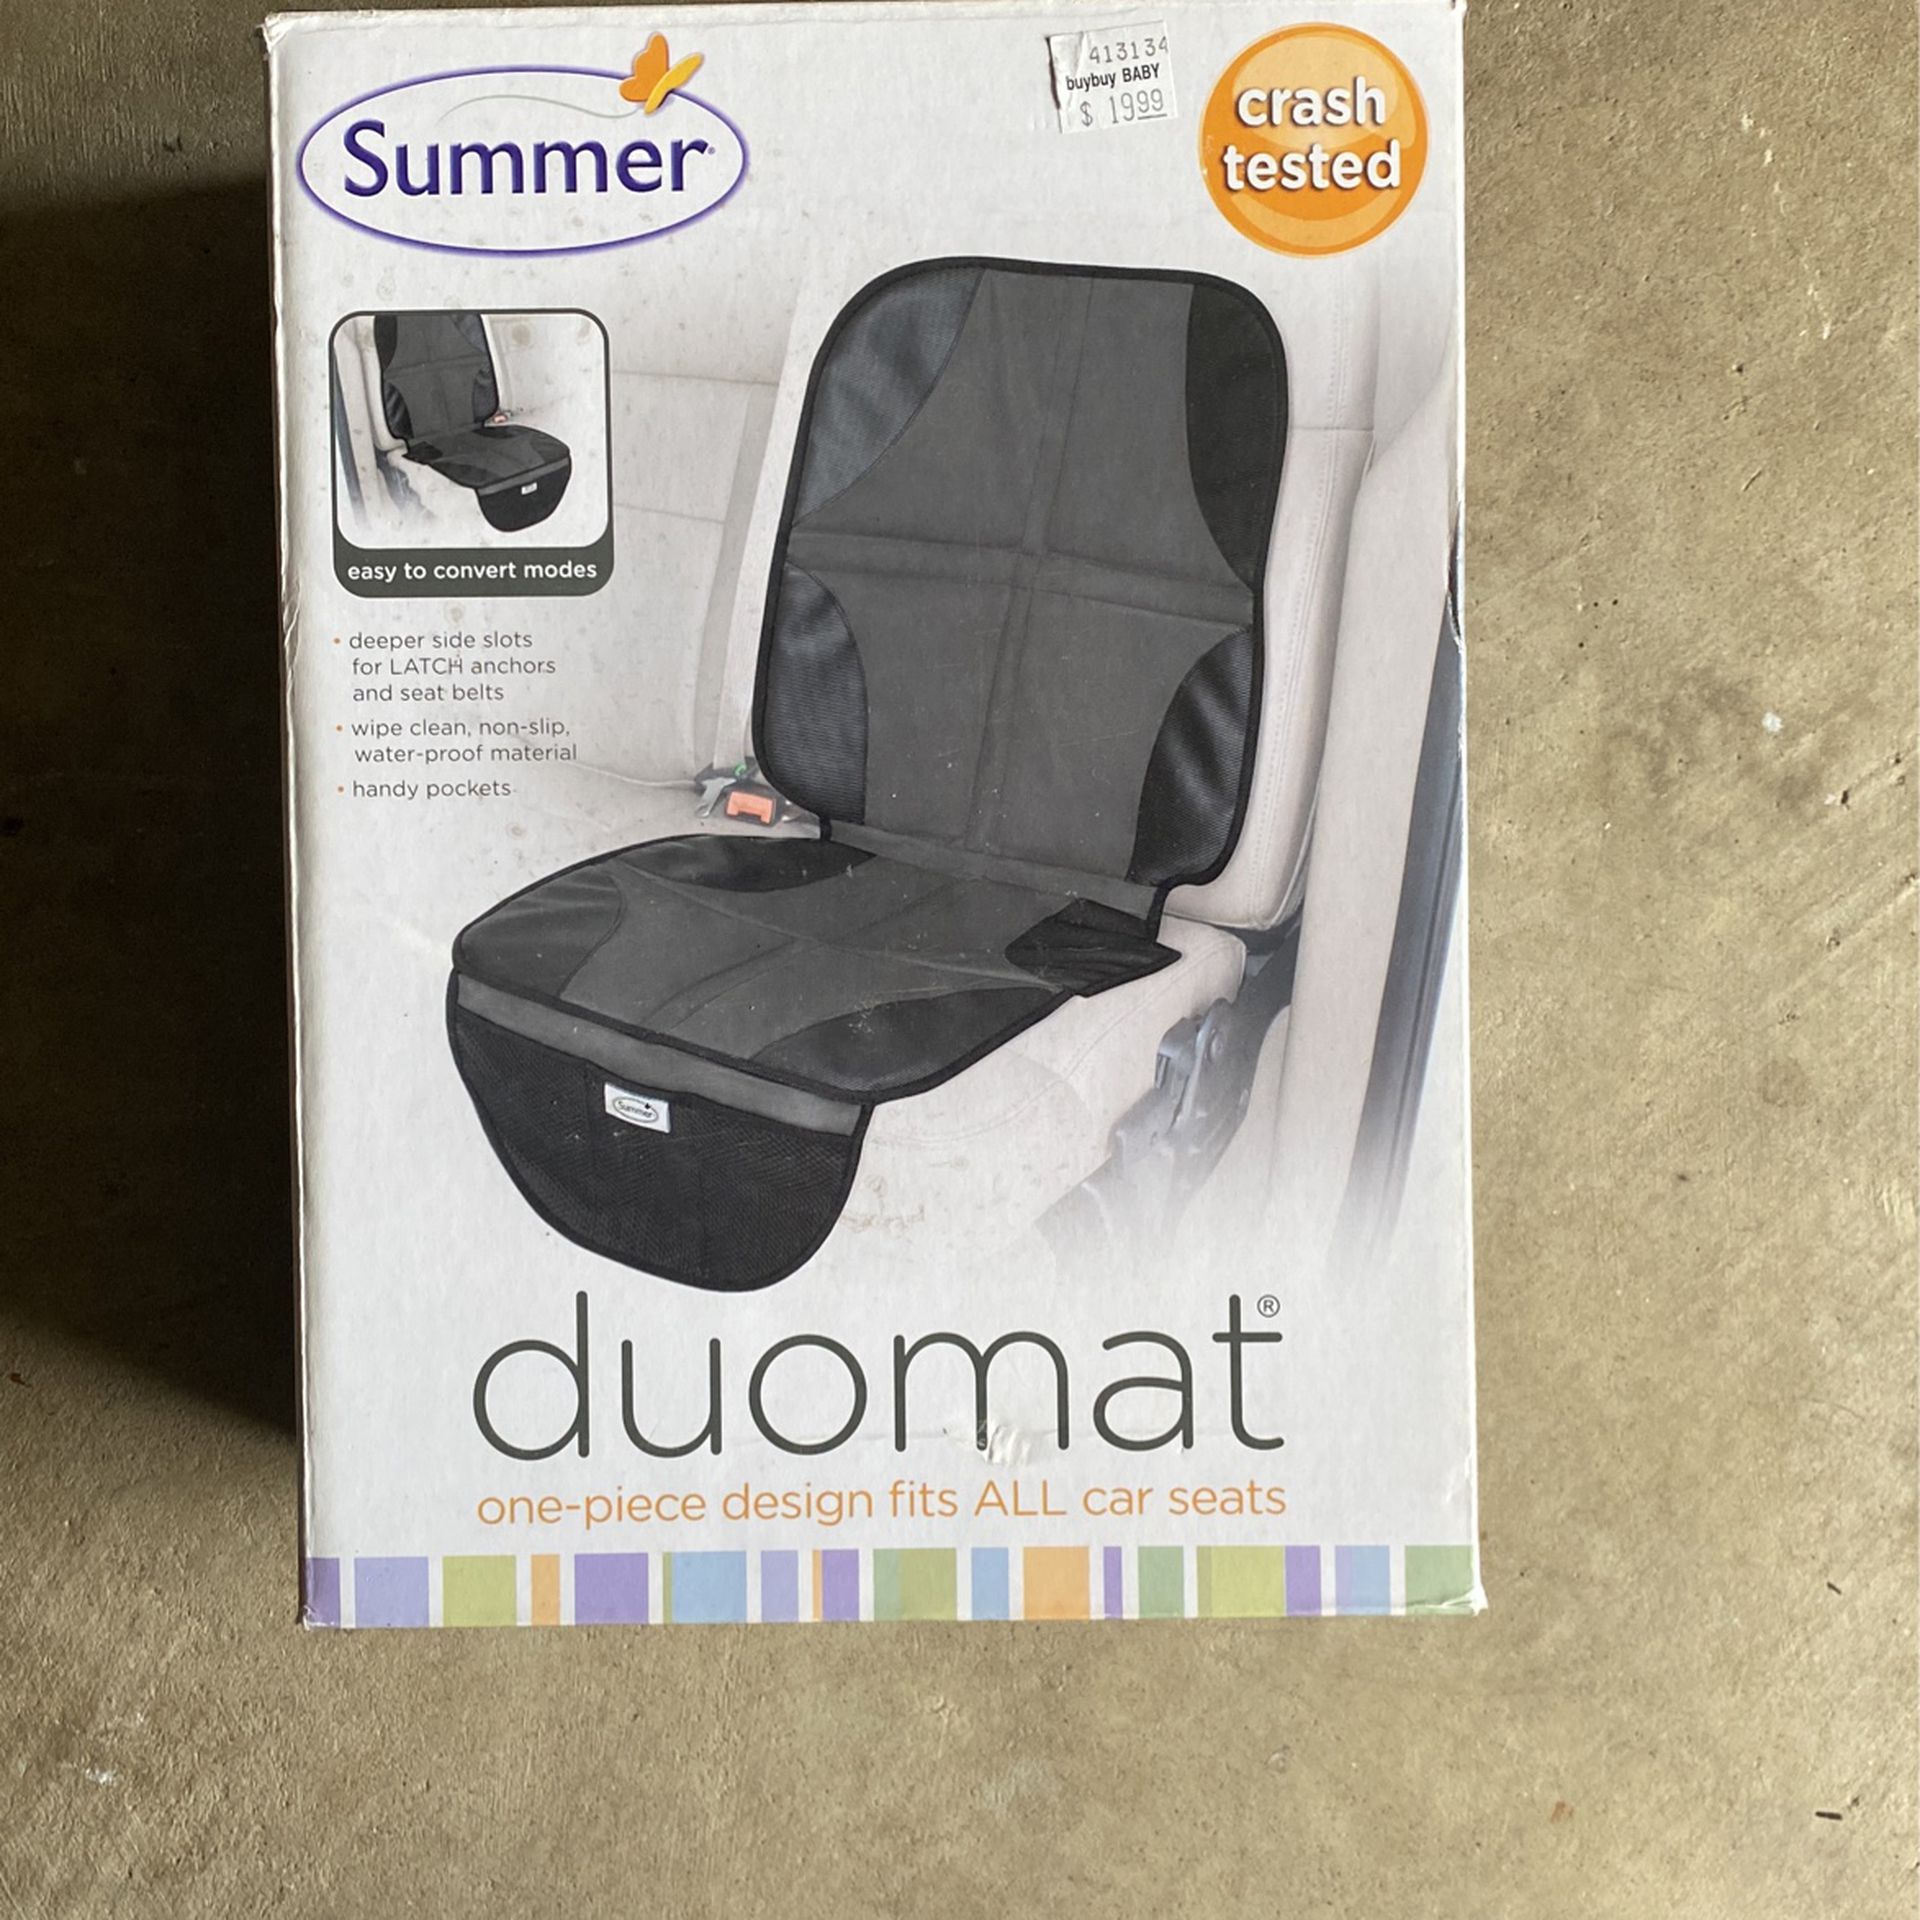 Seat protector for car seats